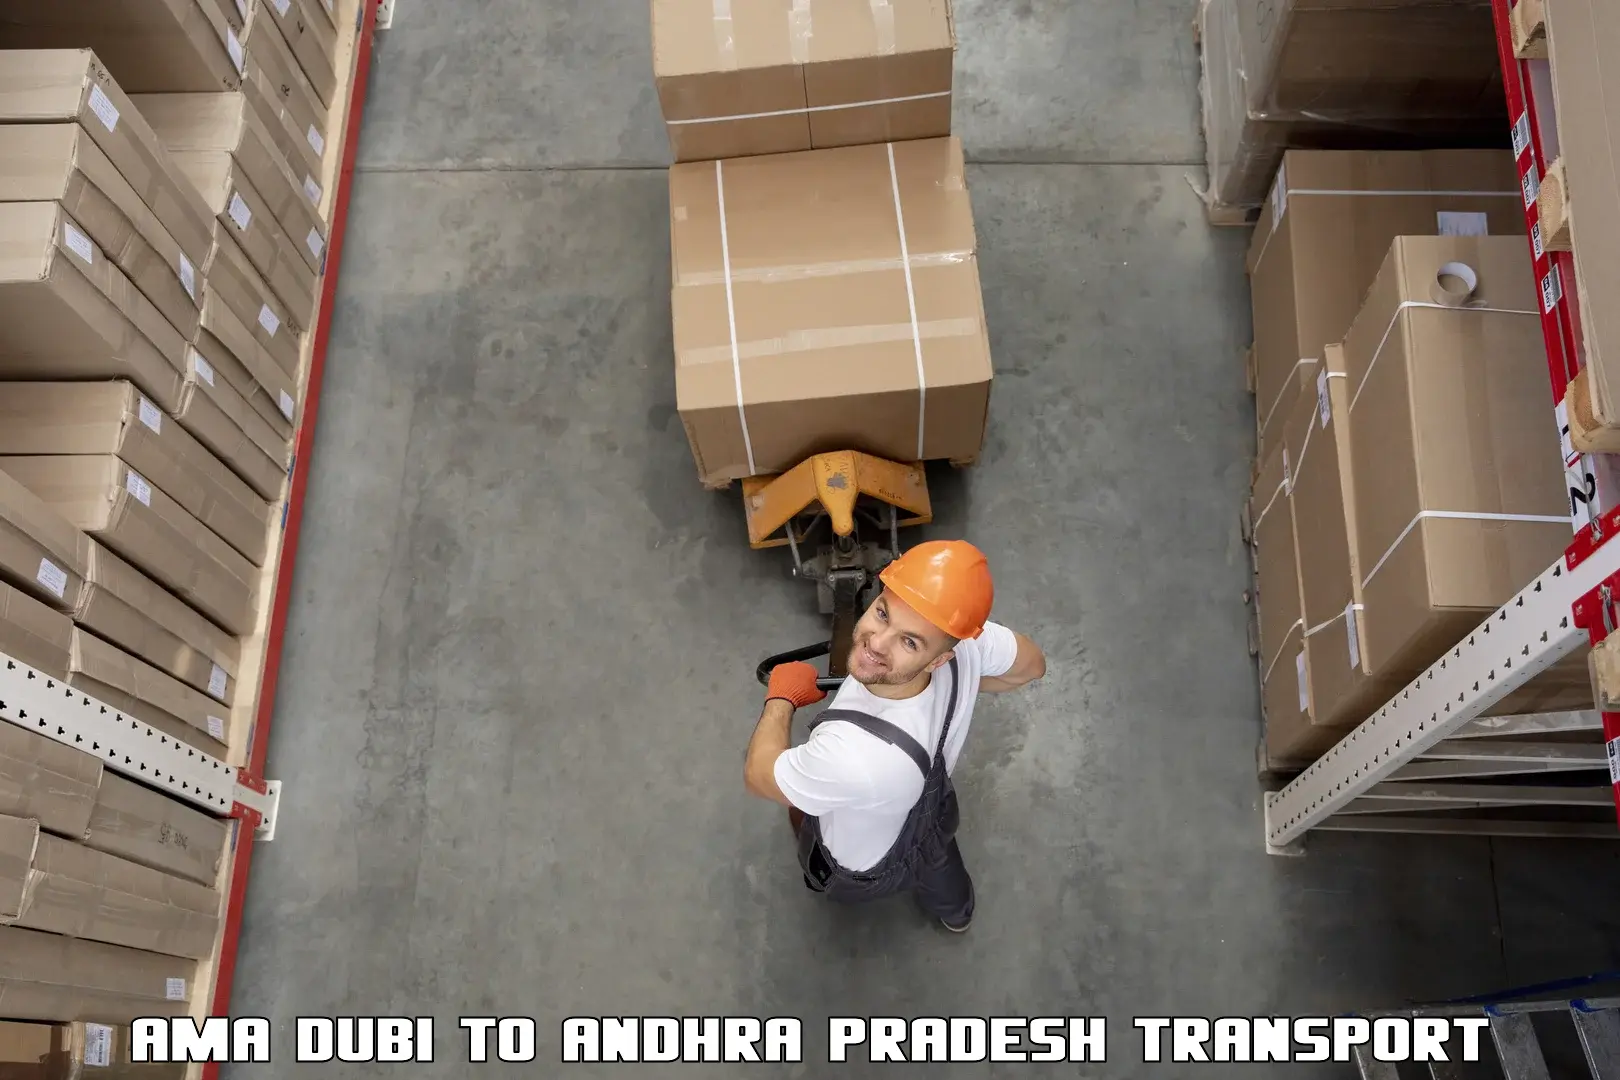 Package delivery services Ama Dubi to Sompeta